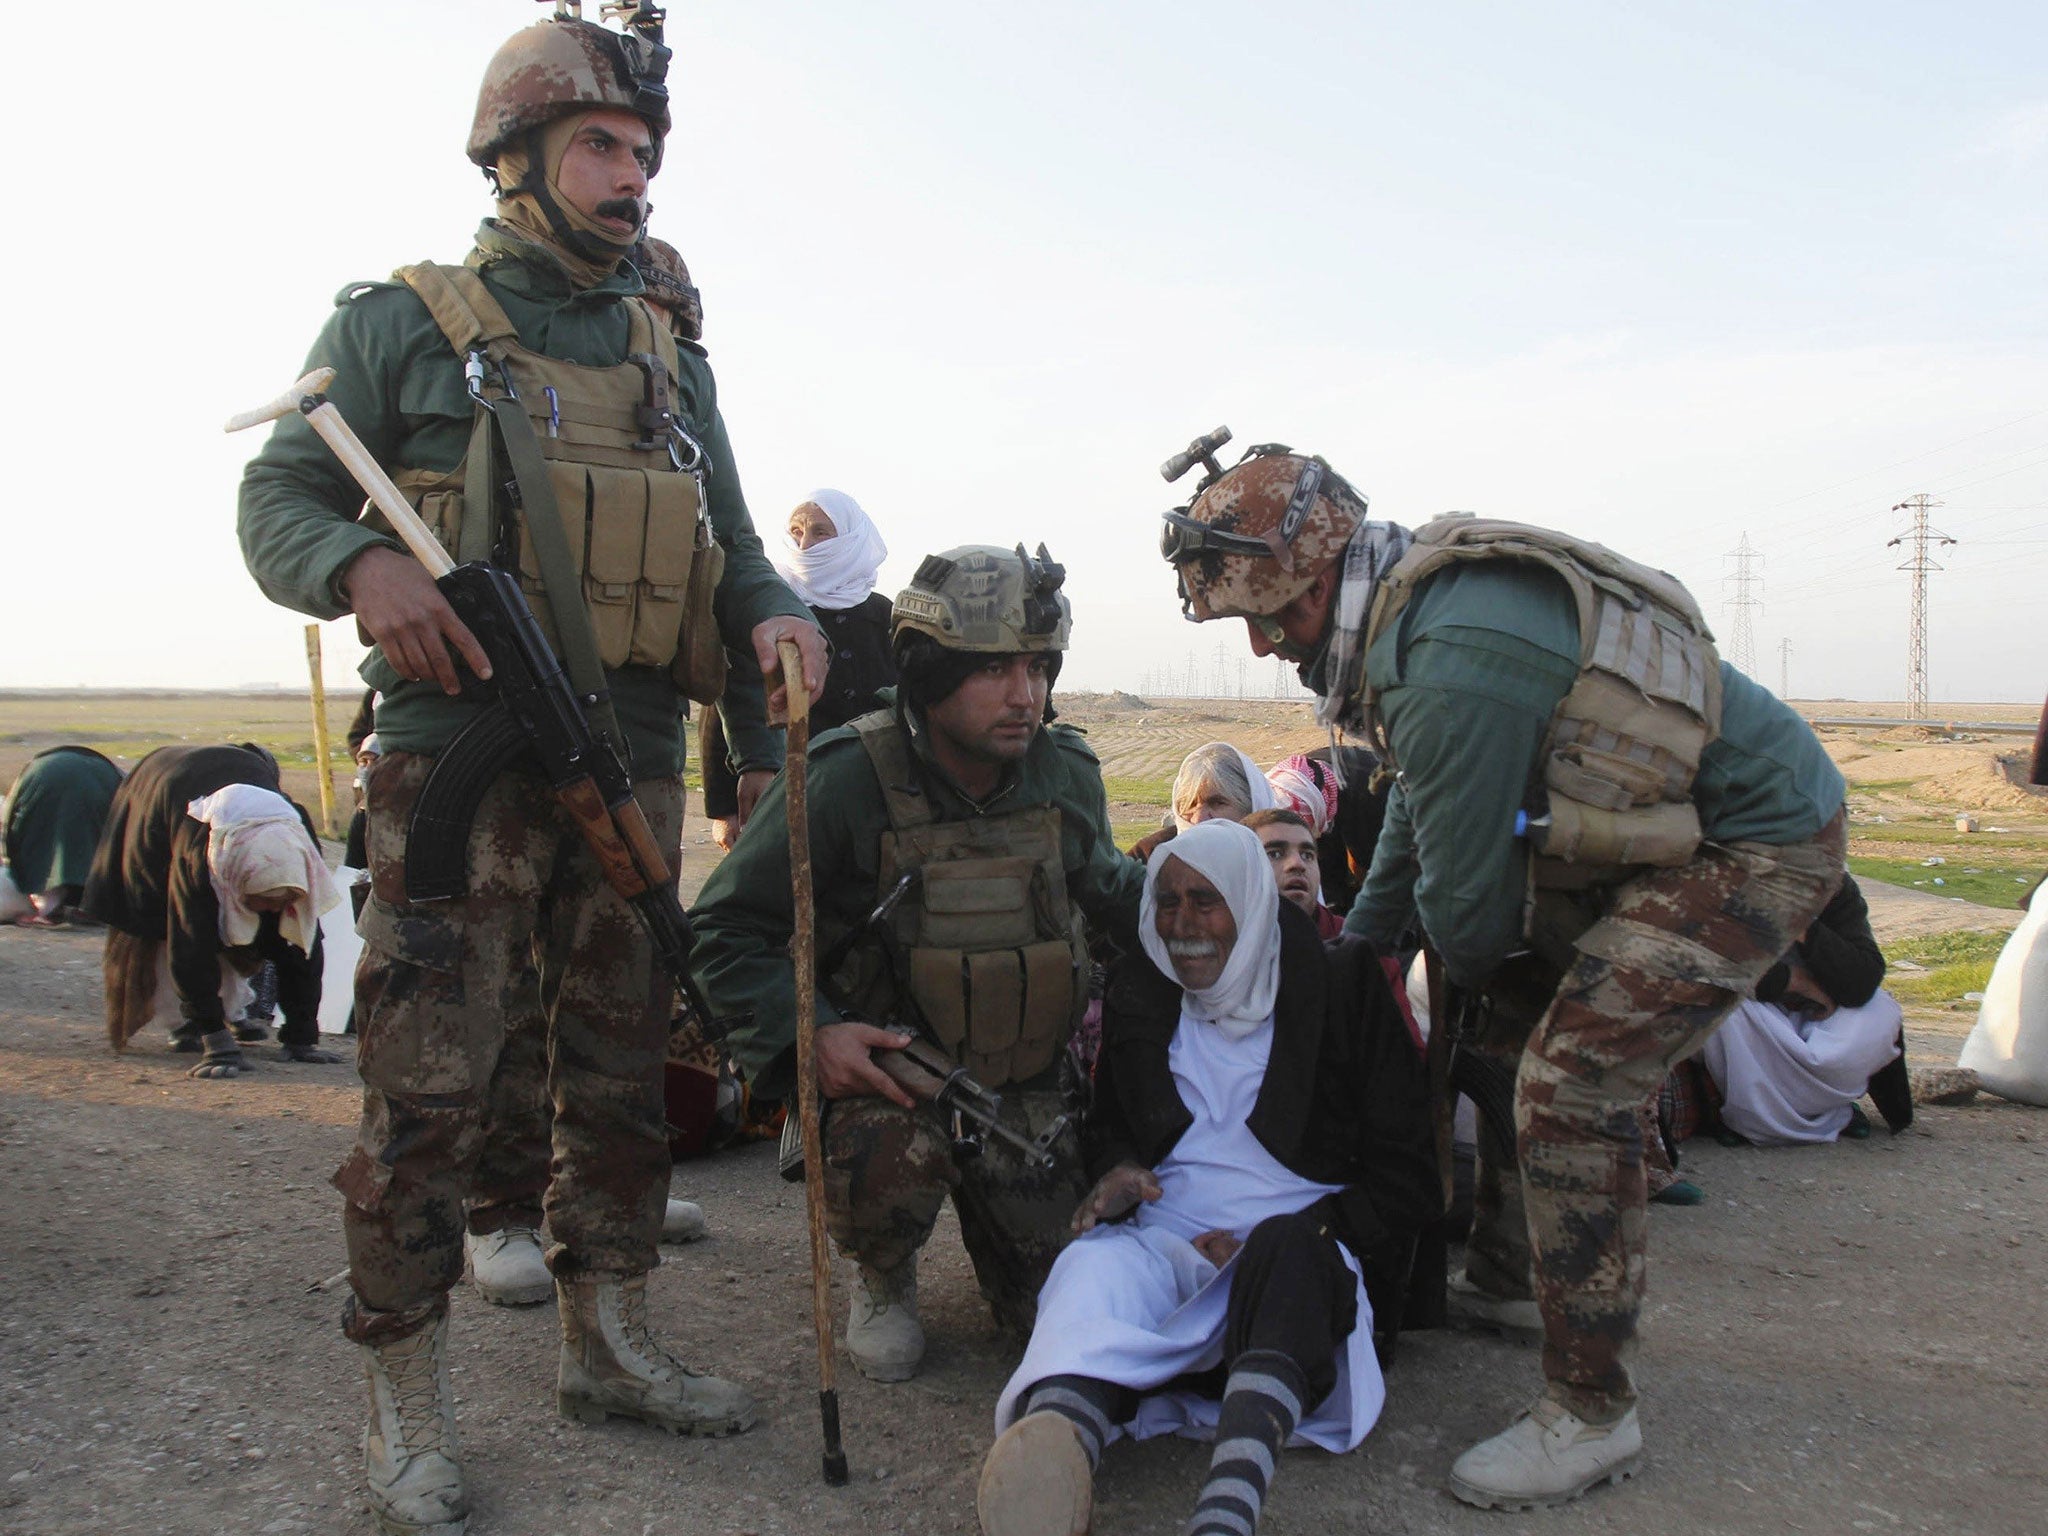 Kurdish security forces help people from the minority Yazidi sect, on the outskirts of Kirkuk January 17, 2015